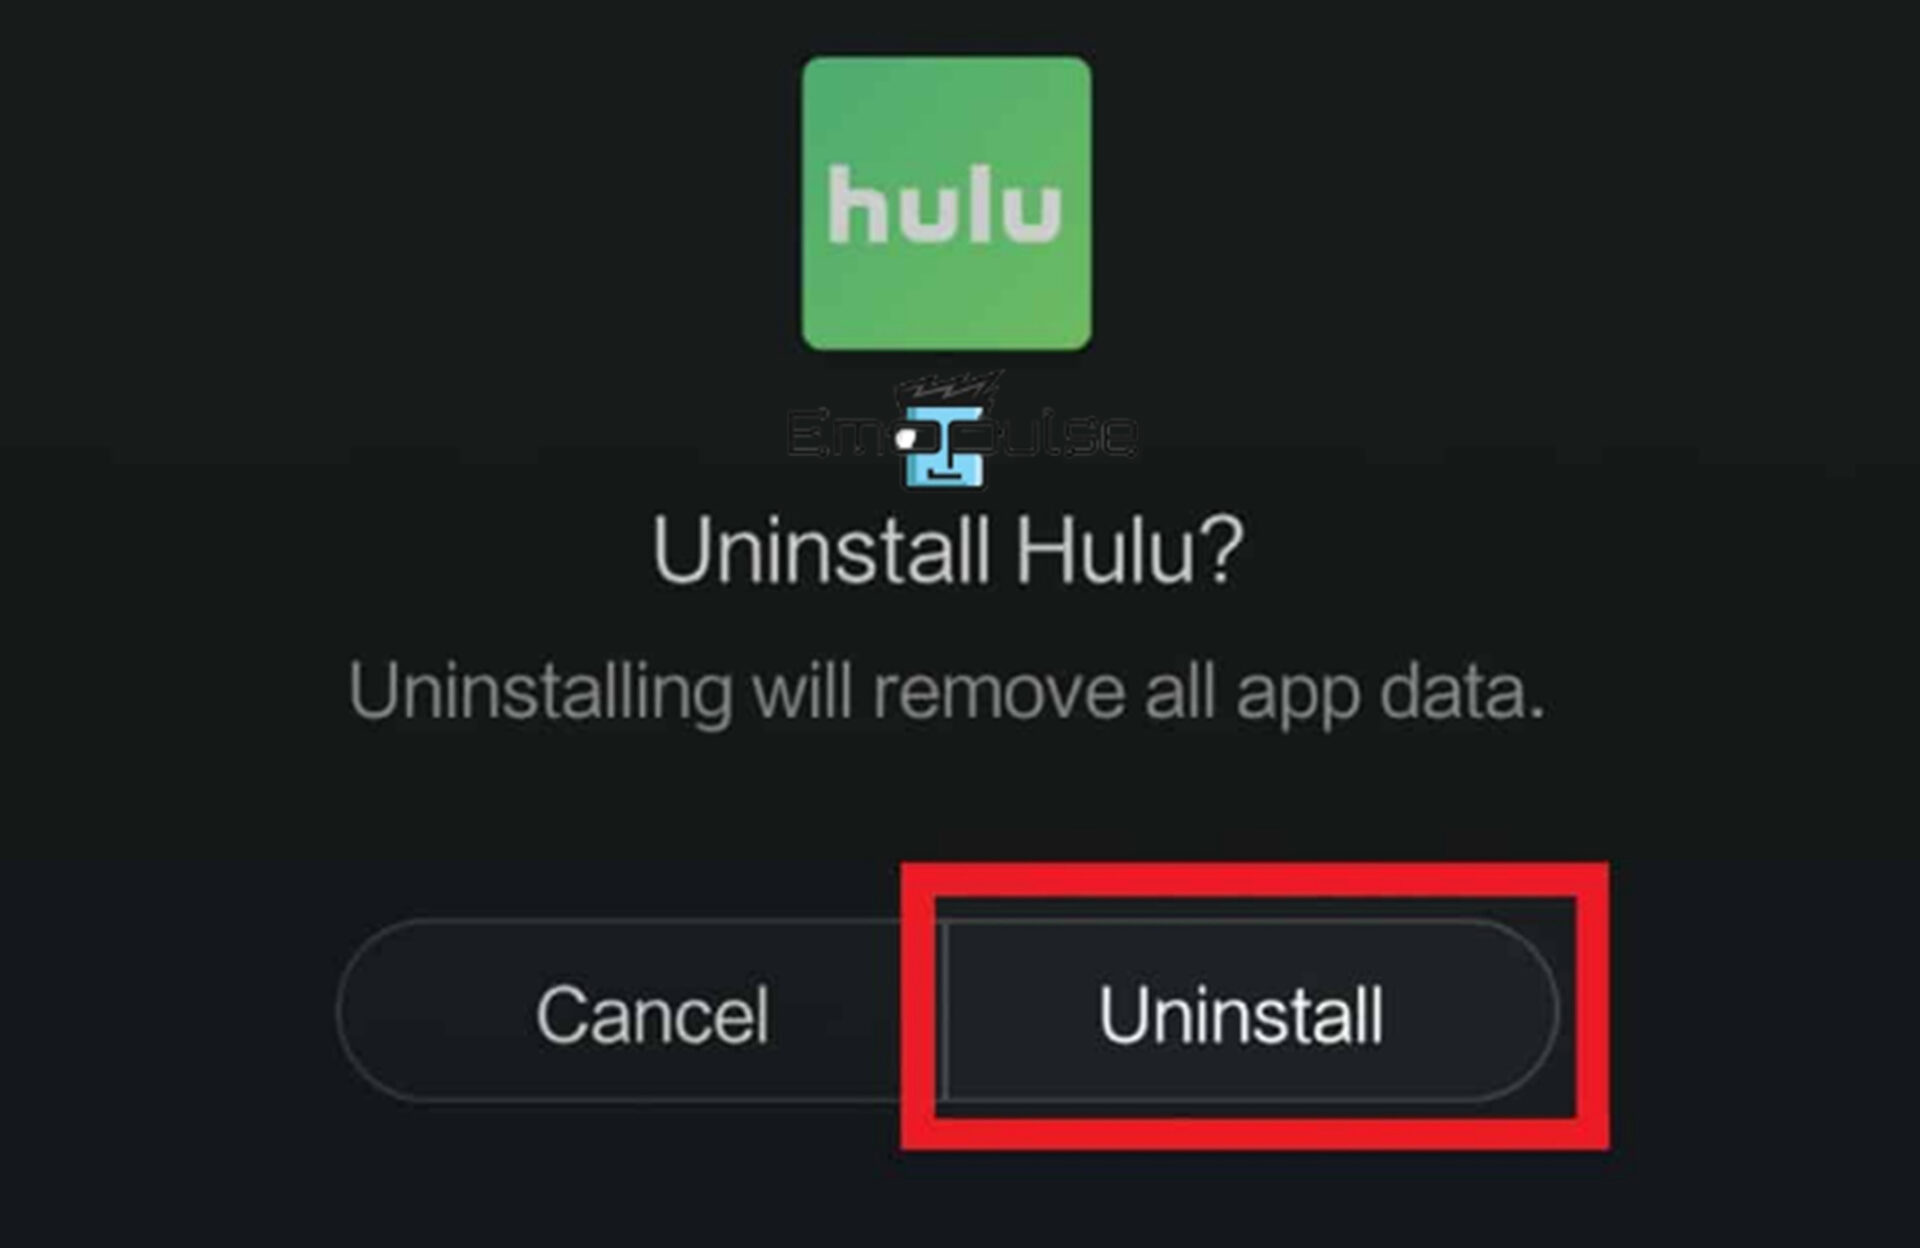 Uninstall and reinstall the app